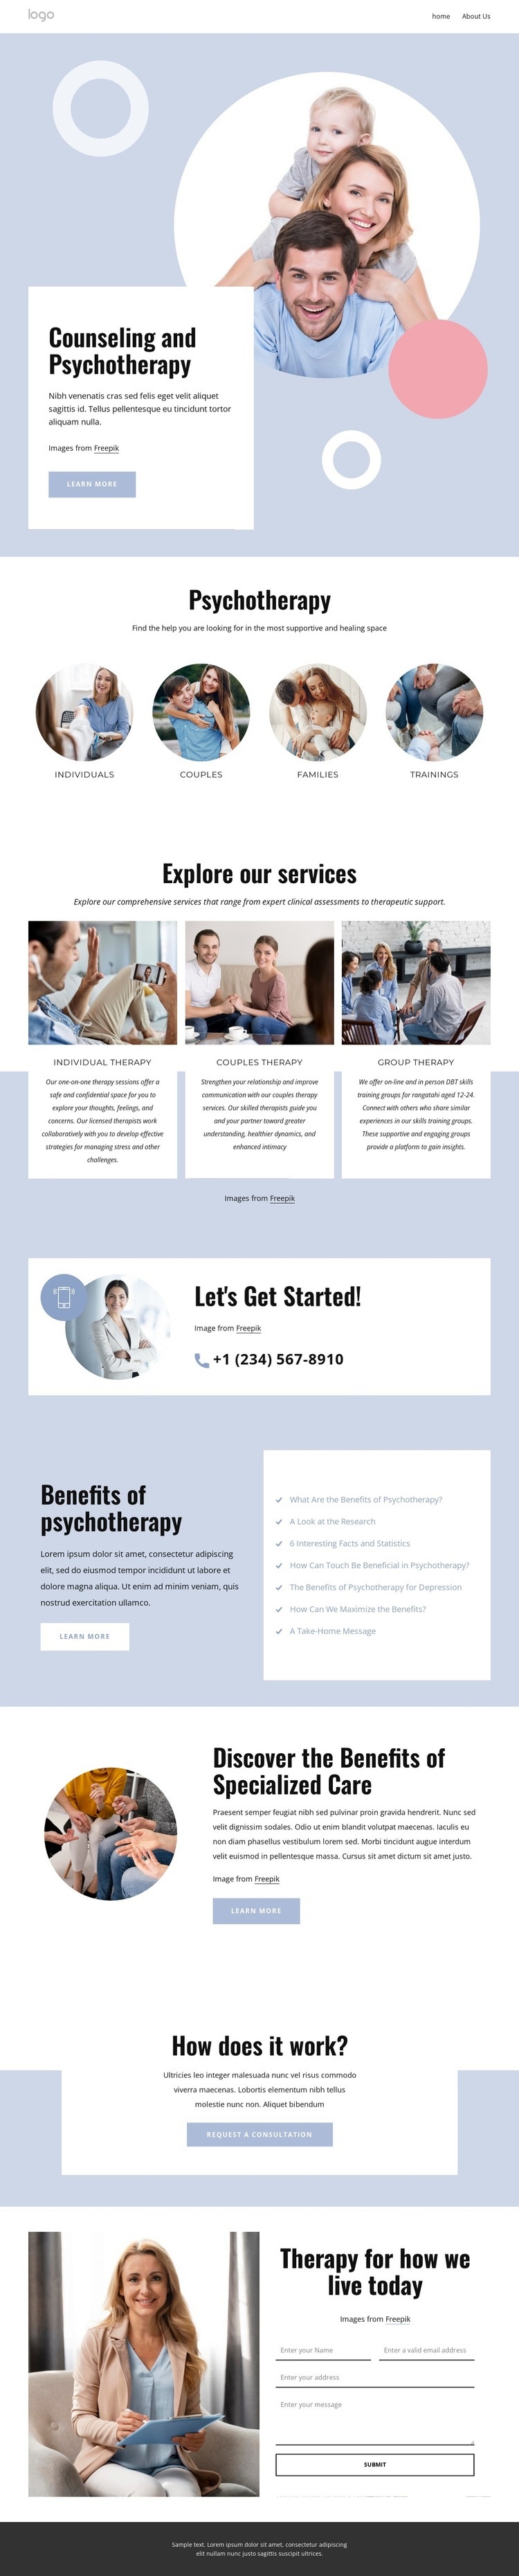 Counseling and psychotherapy Web Page Design